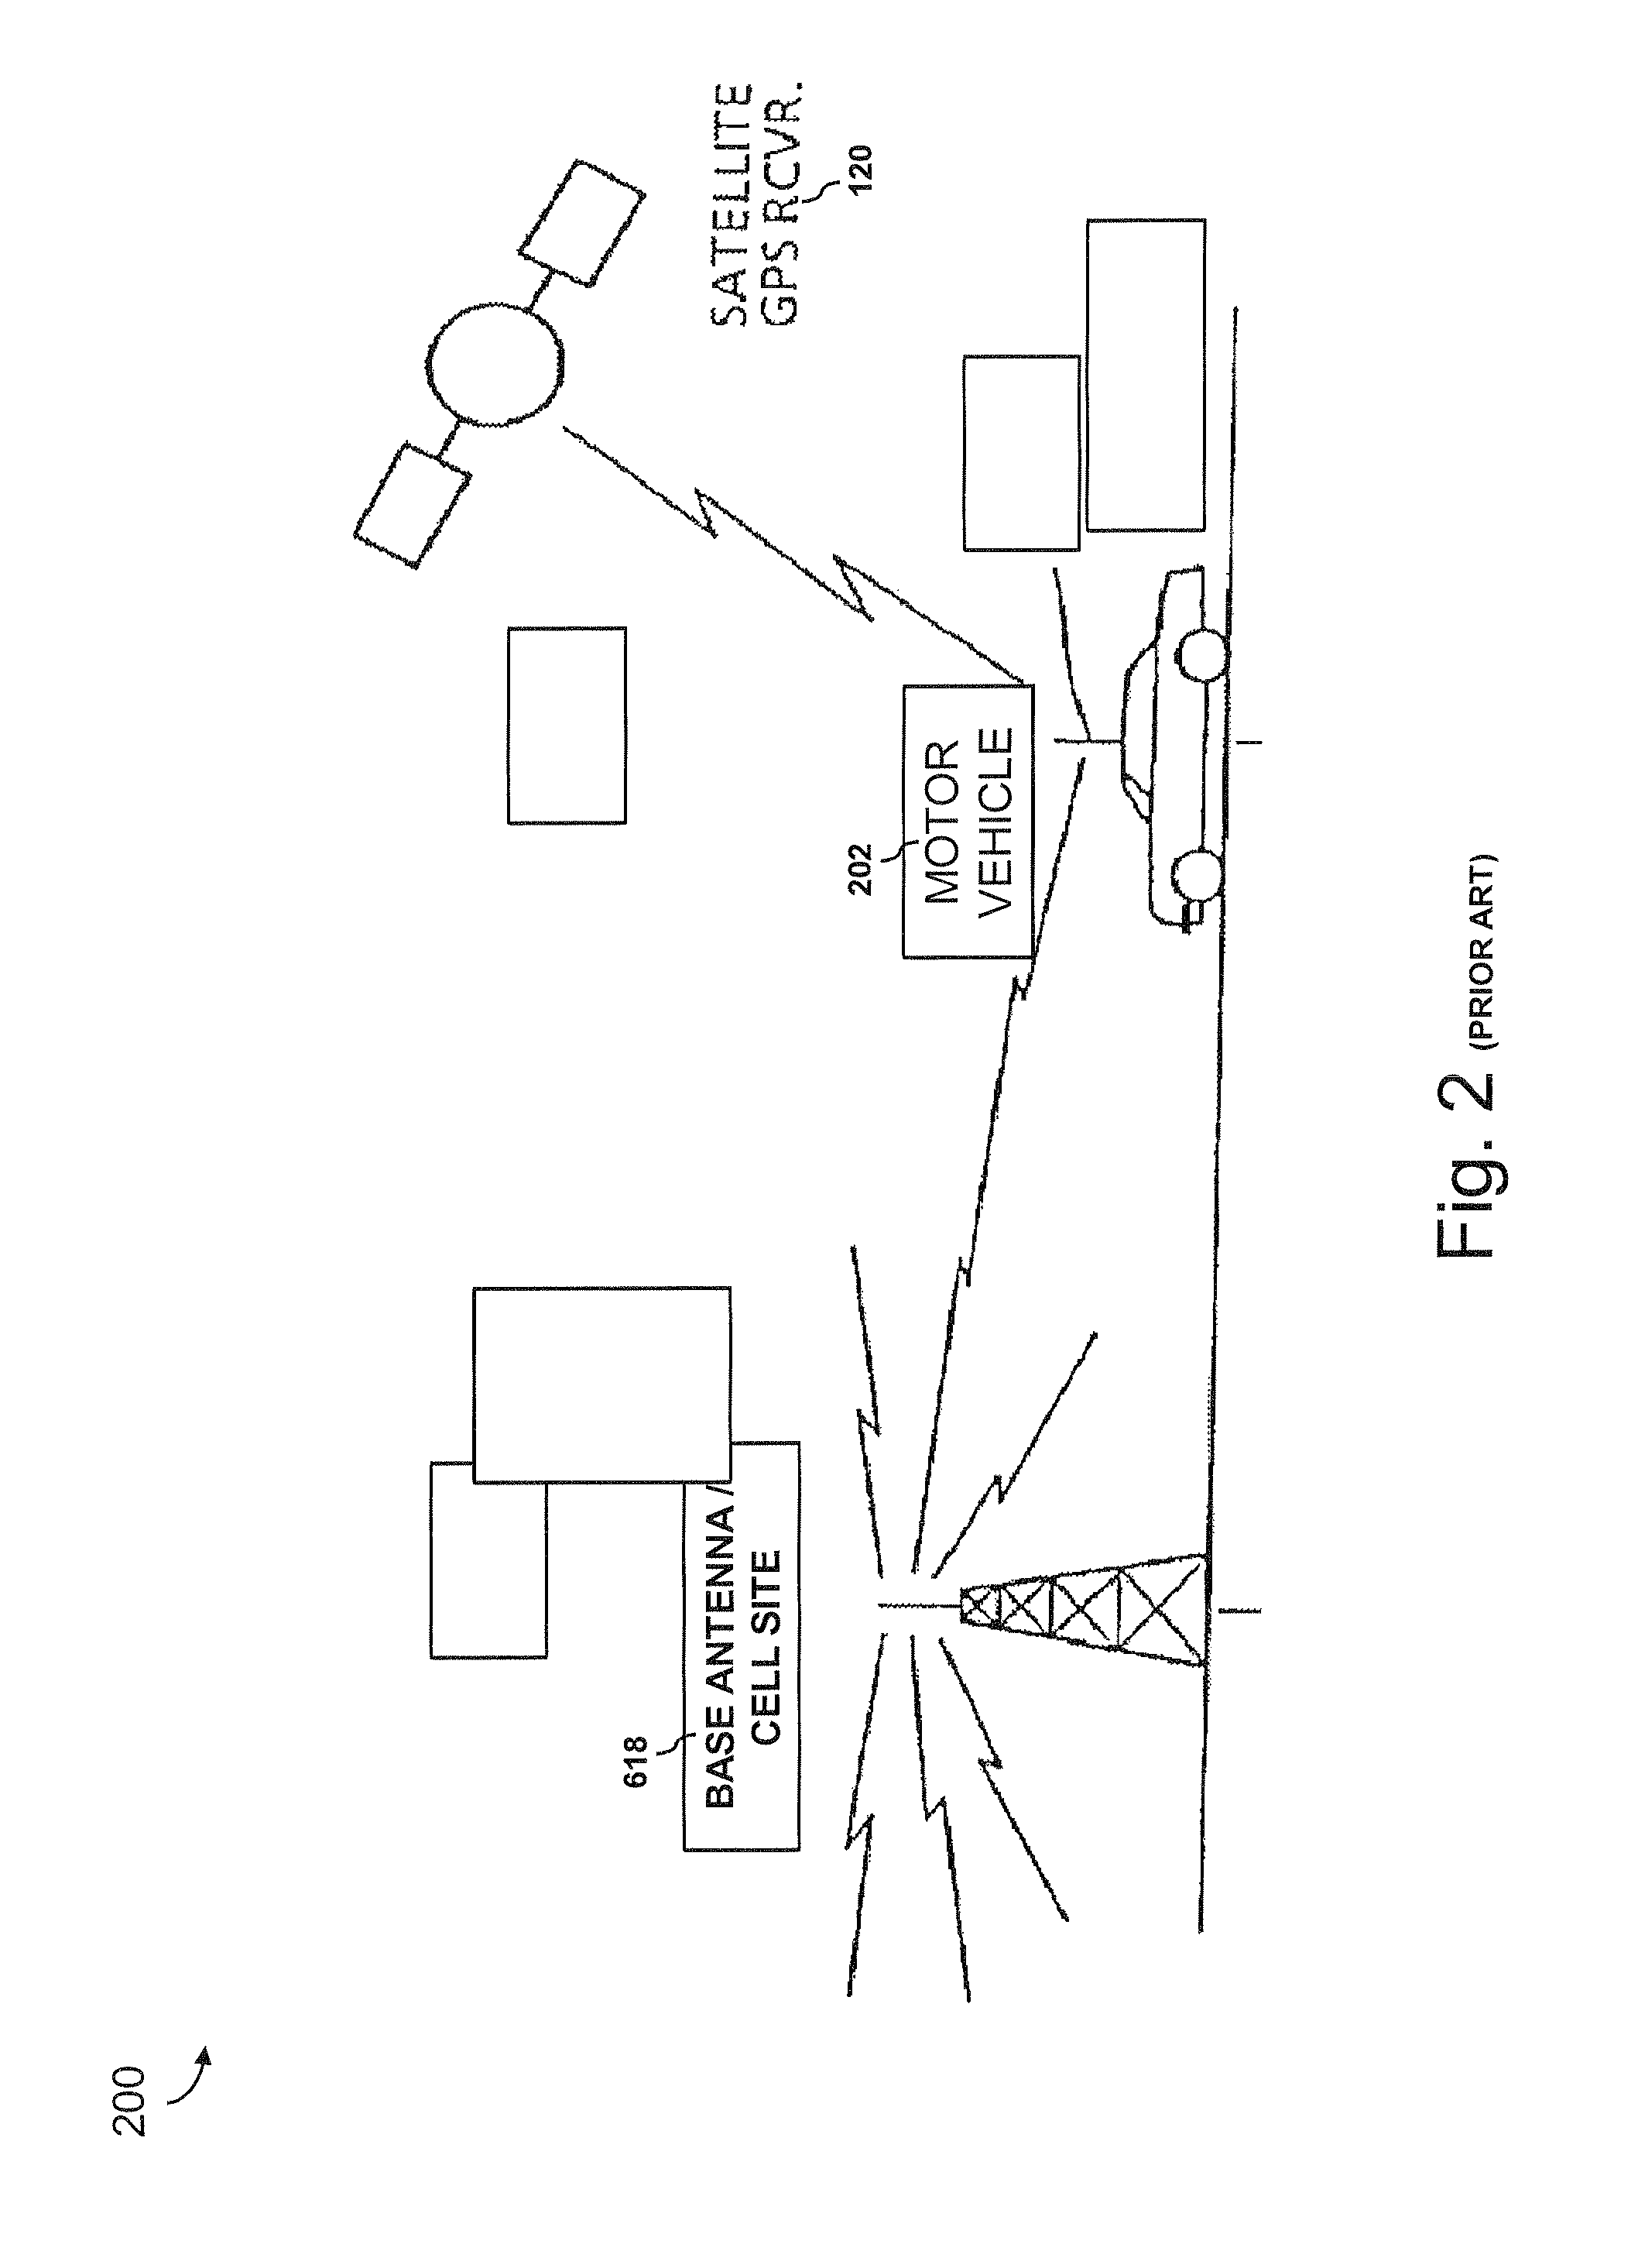 System and method for providing electronic toll collection to users of wireless mobile devices